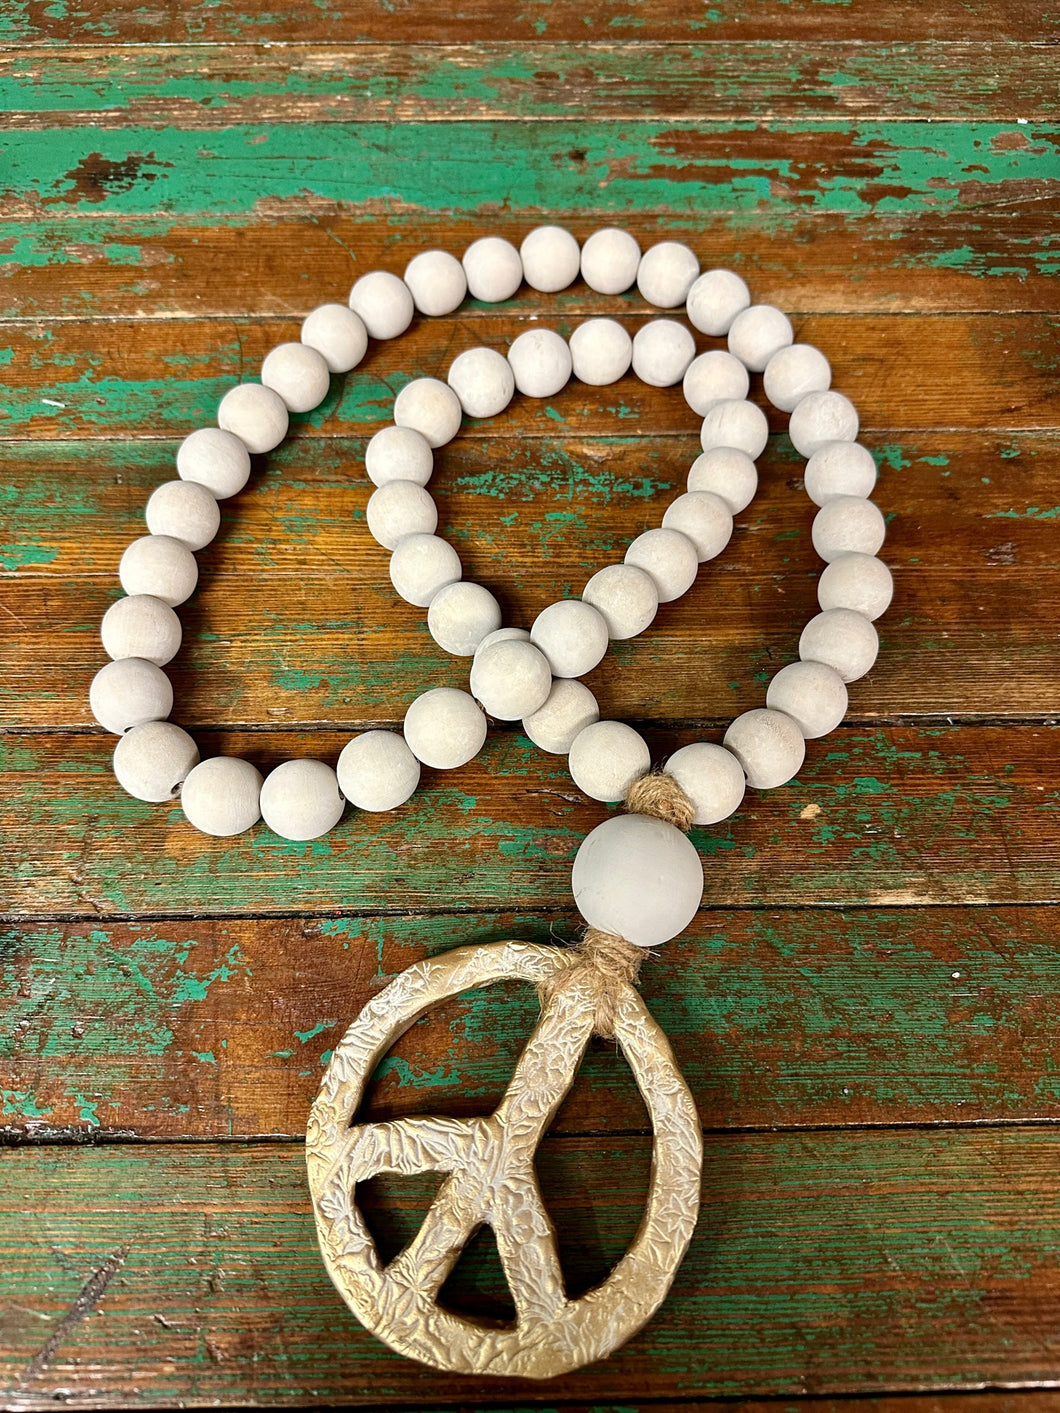 Large Blessing Beads With Peace Sign